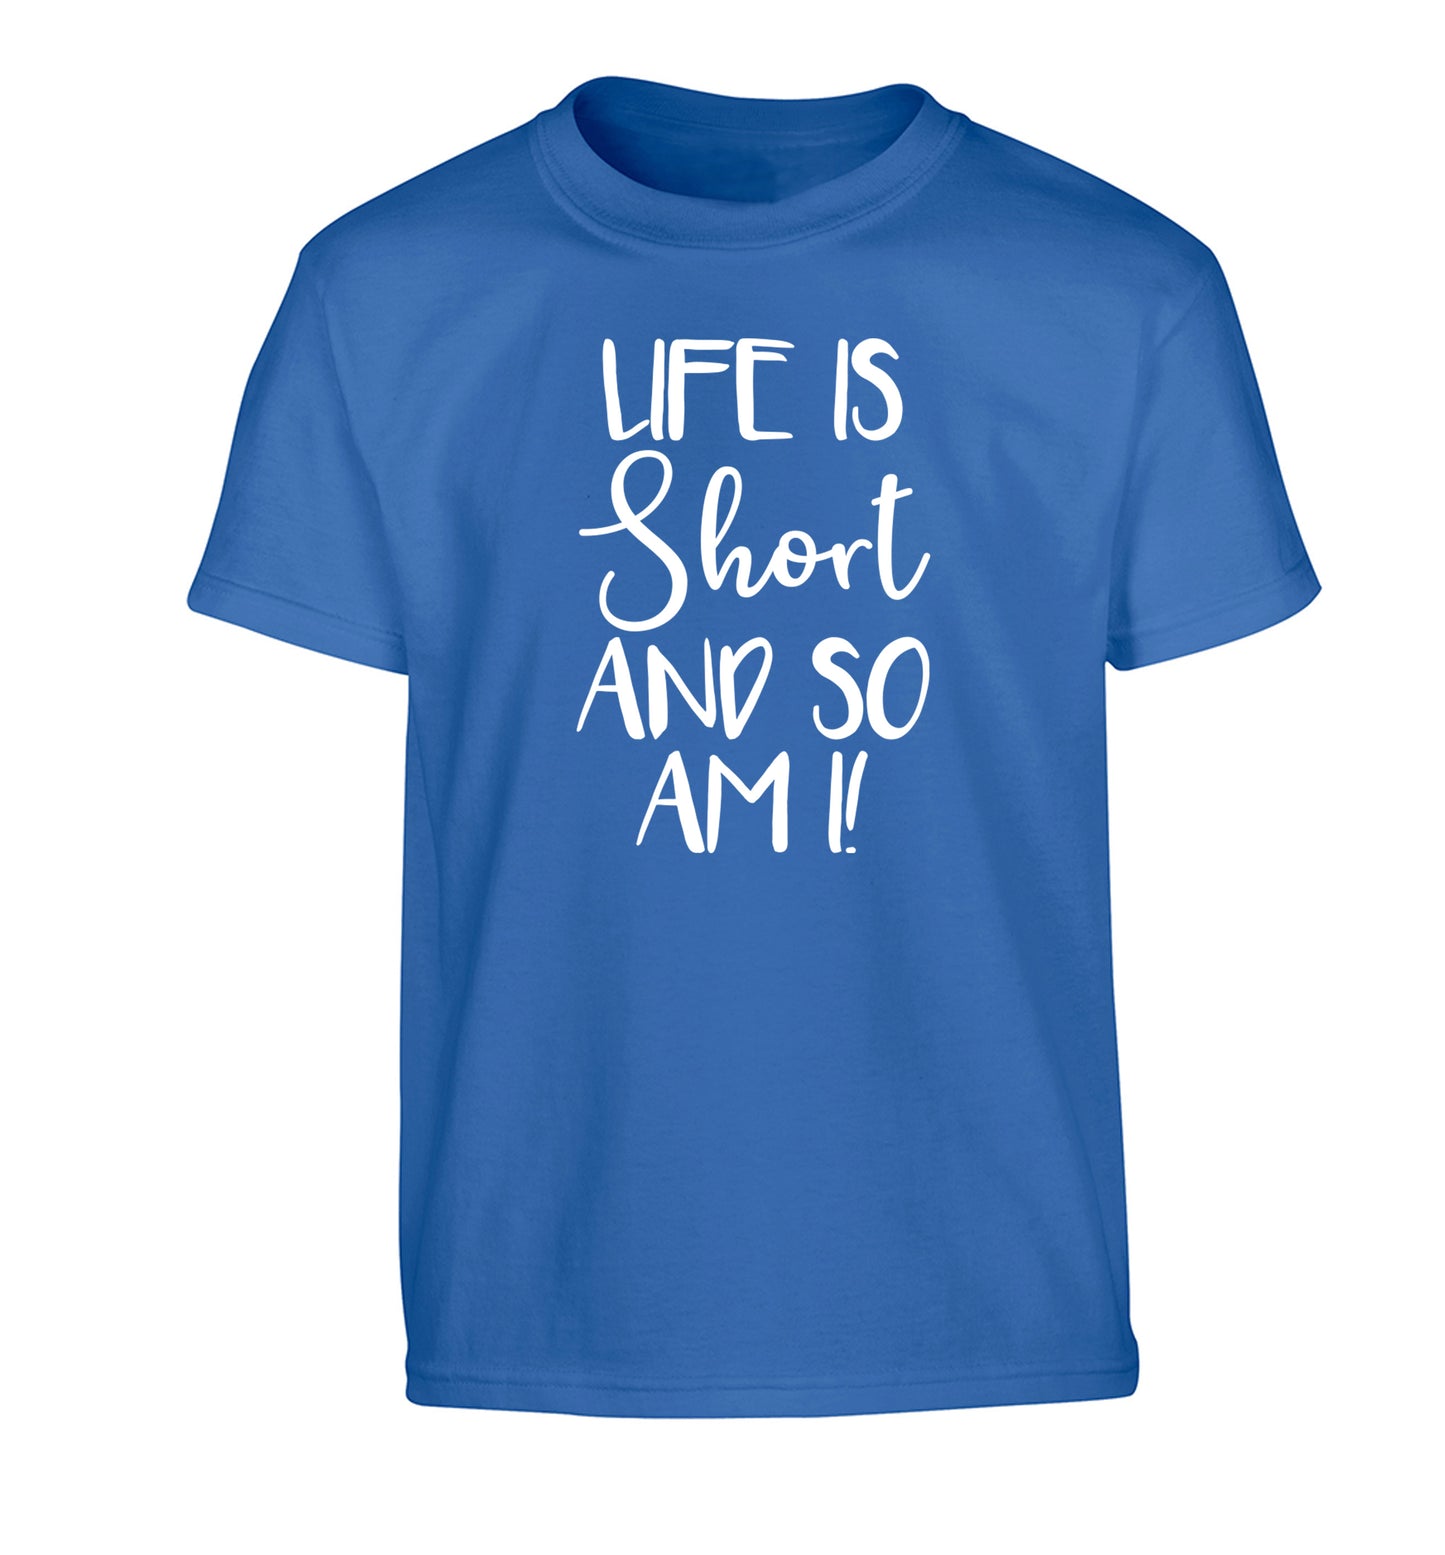 Life is short and so am I! Children's blue Tshirt 12-13 Years